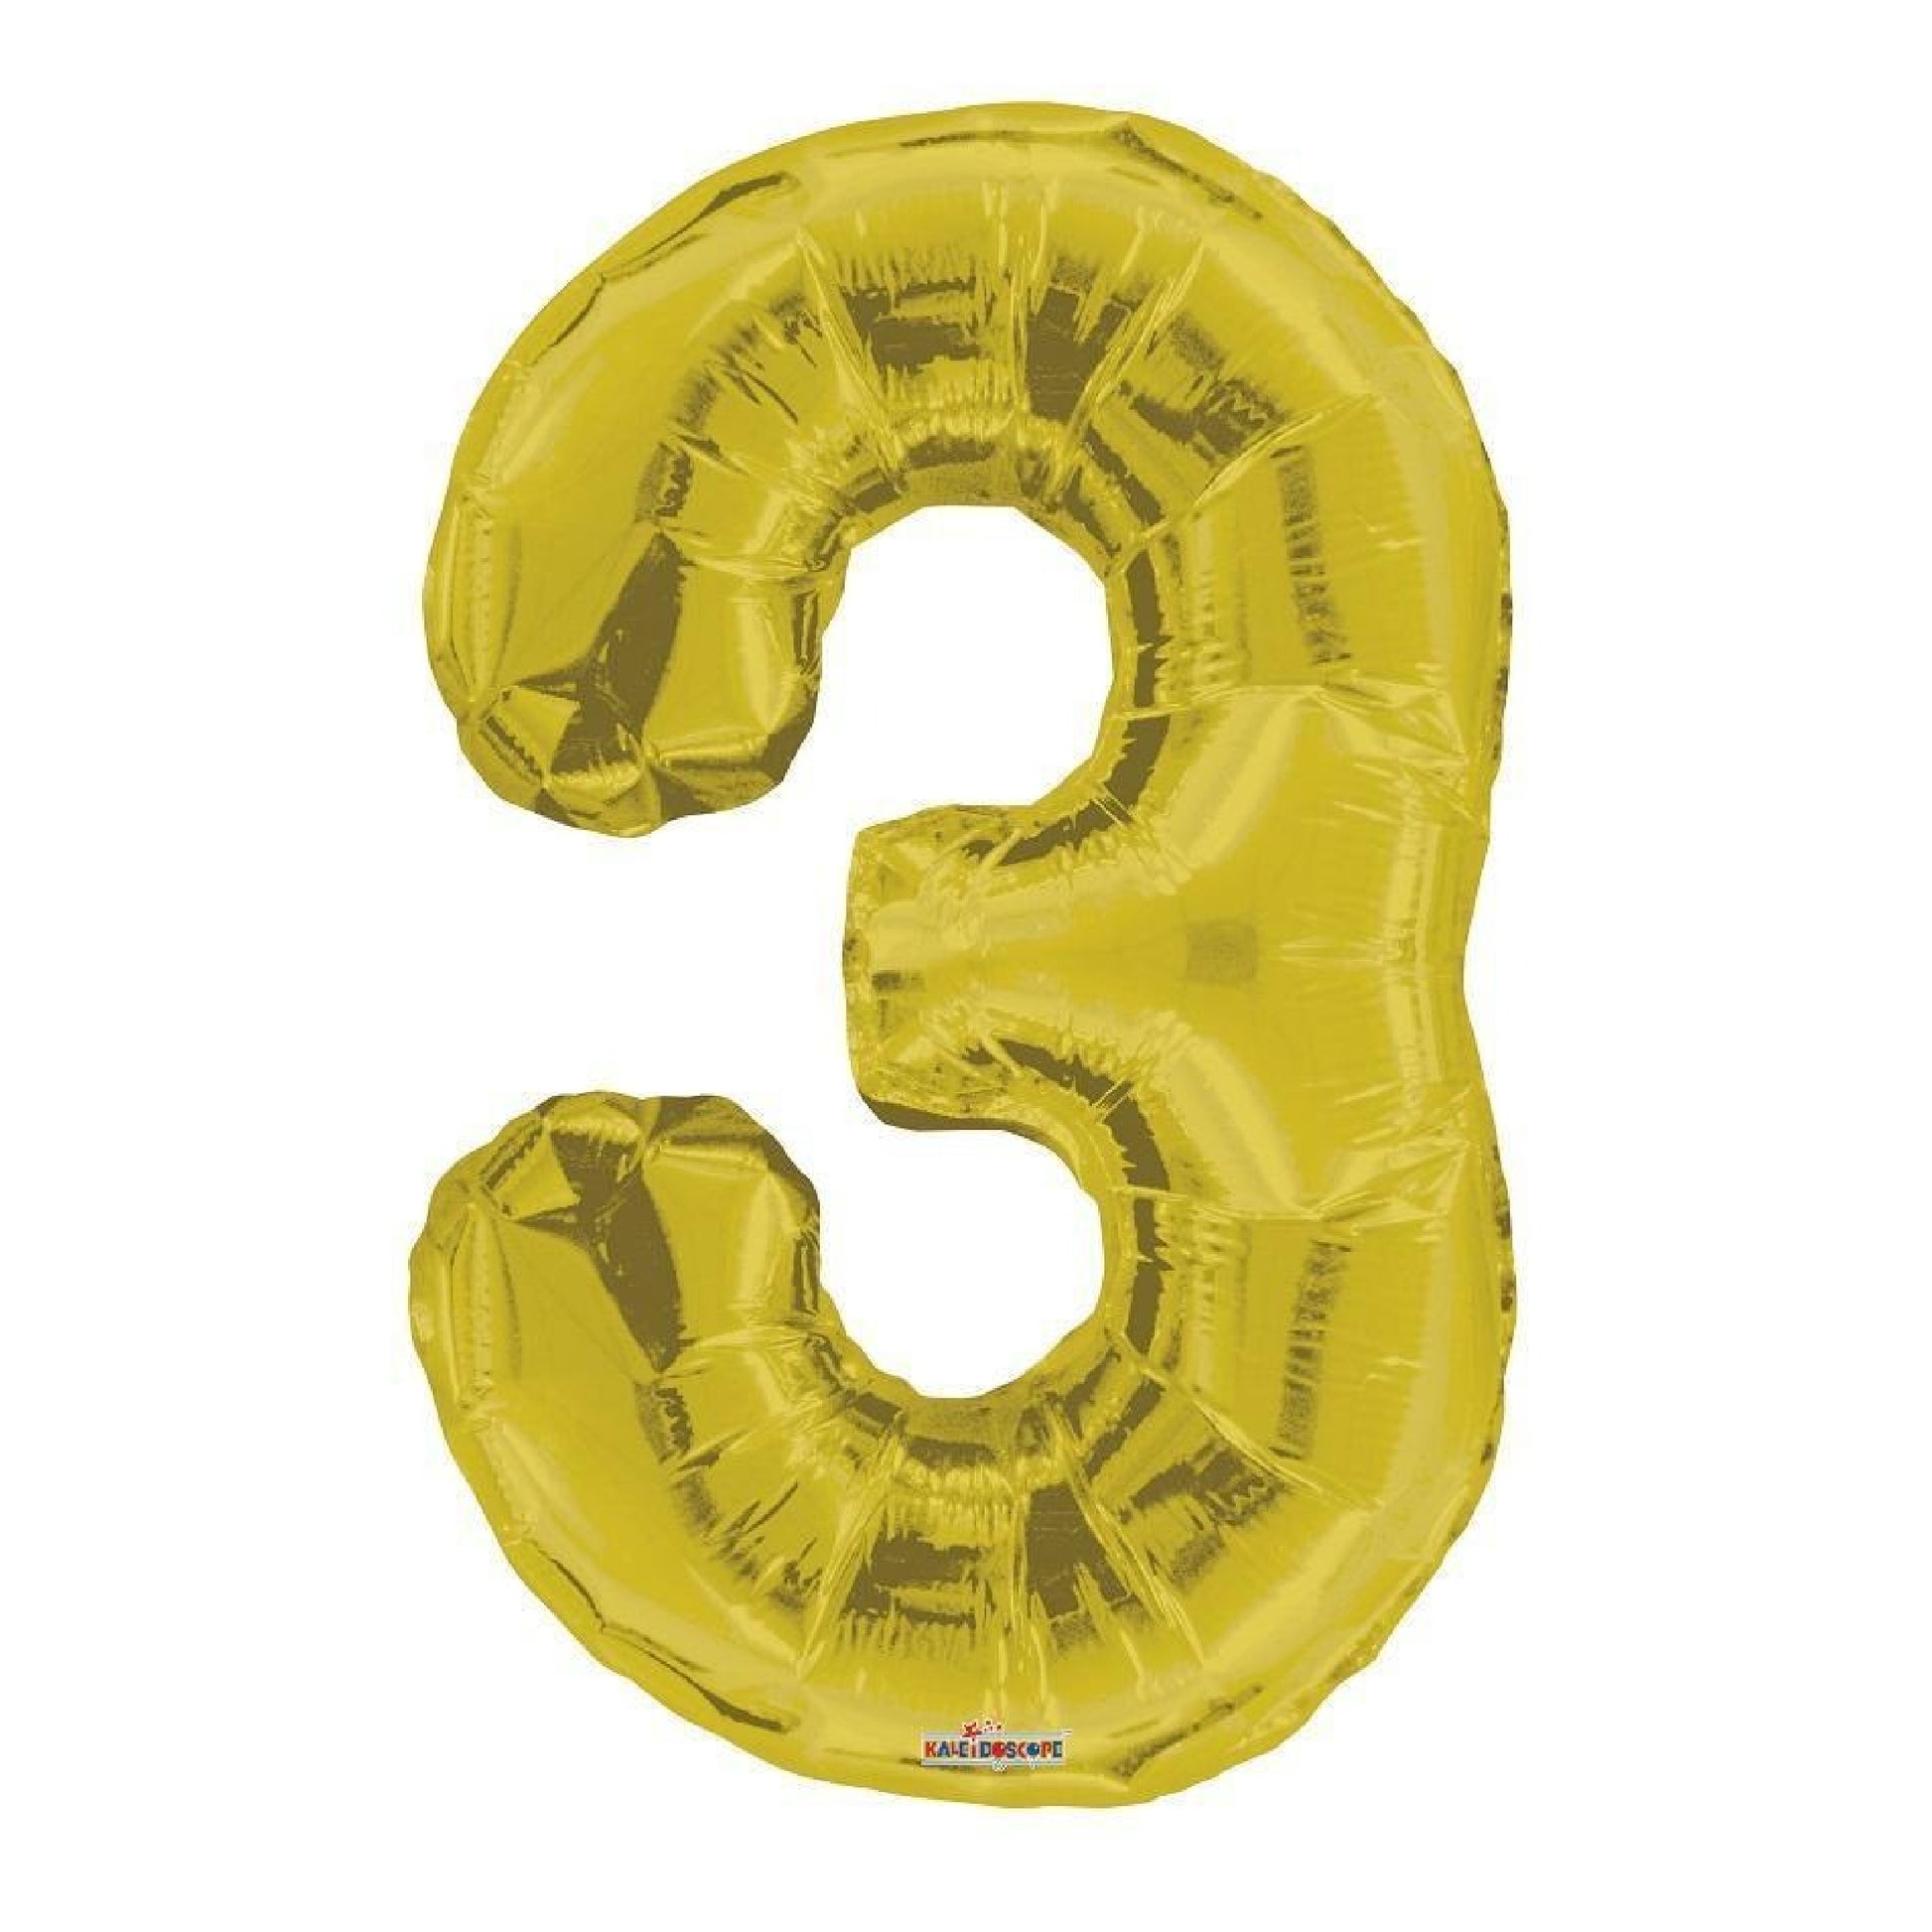 34 inch helium filled gold number balloon 3 